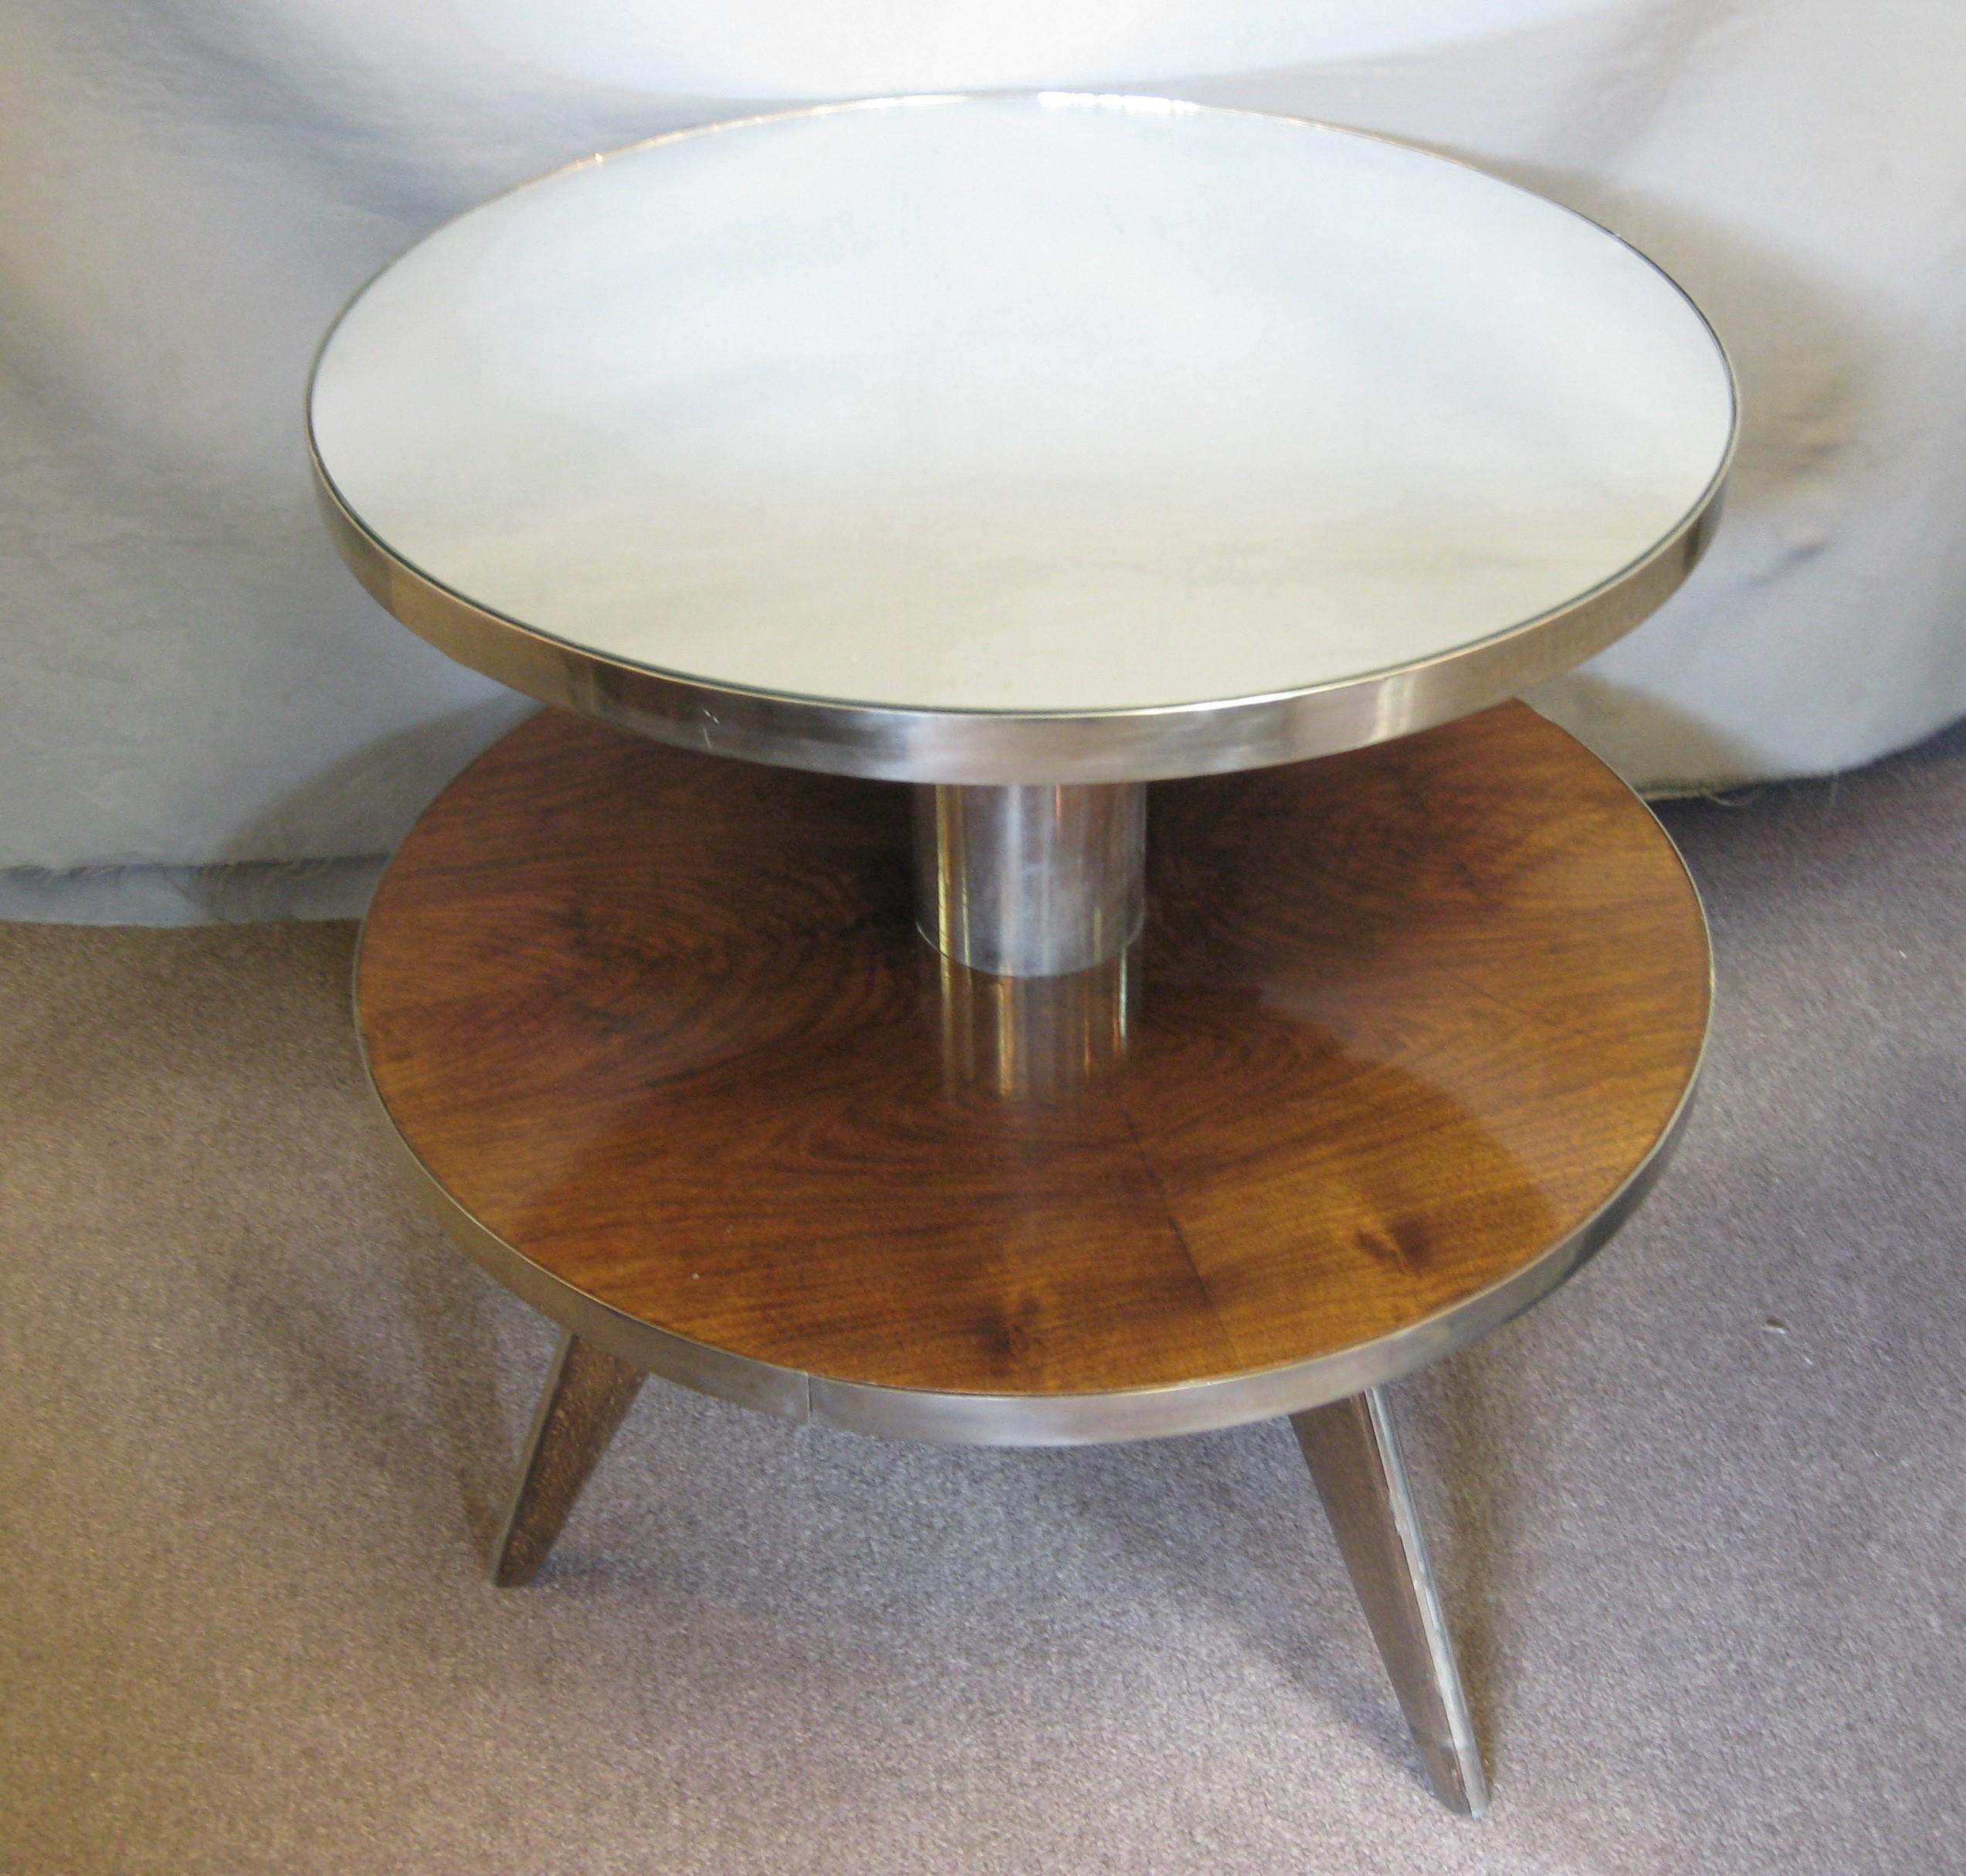 French Art Deco Occasional Table in Wood, Mirror, Nickel -Maurice Triboy For Sale 1